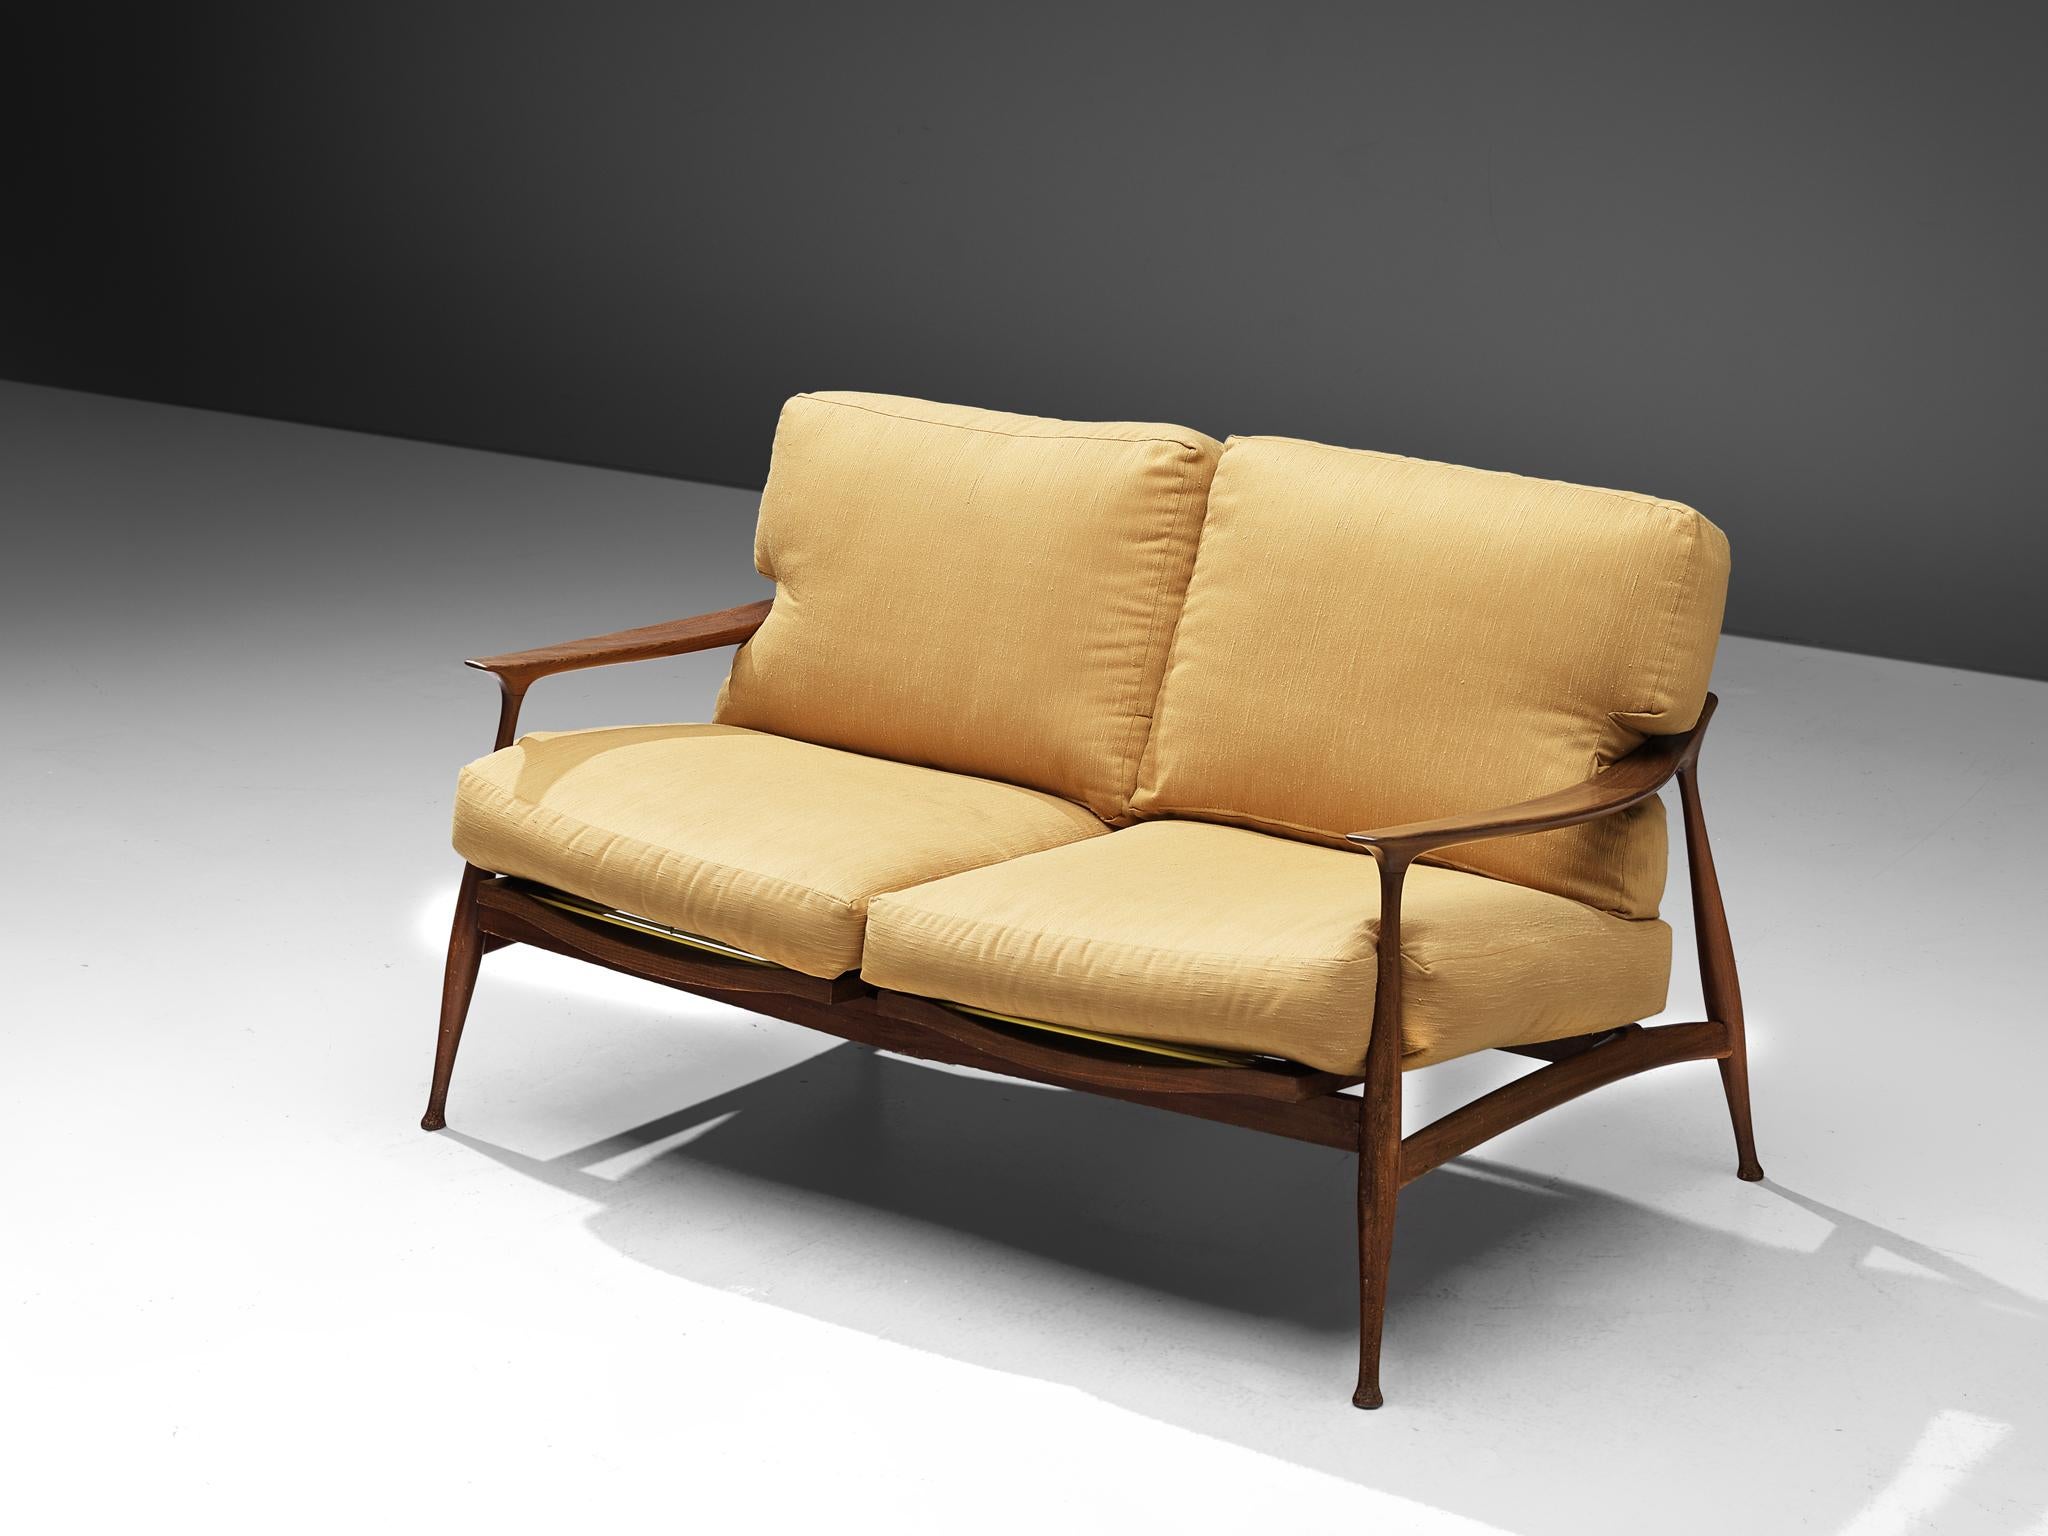 Fratelli Reguitti, sofa 'Lord', walnut and fabric, Italy, 1959

Beautiful settee in solid walnut by Fratelli Reguitti. This sofa has a beautiful detailed and organic shaped design. The high cylindrical legs are tapered to the frame, which gives this